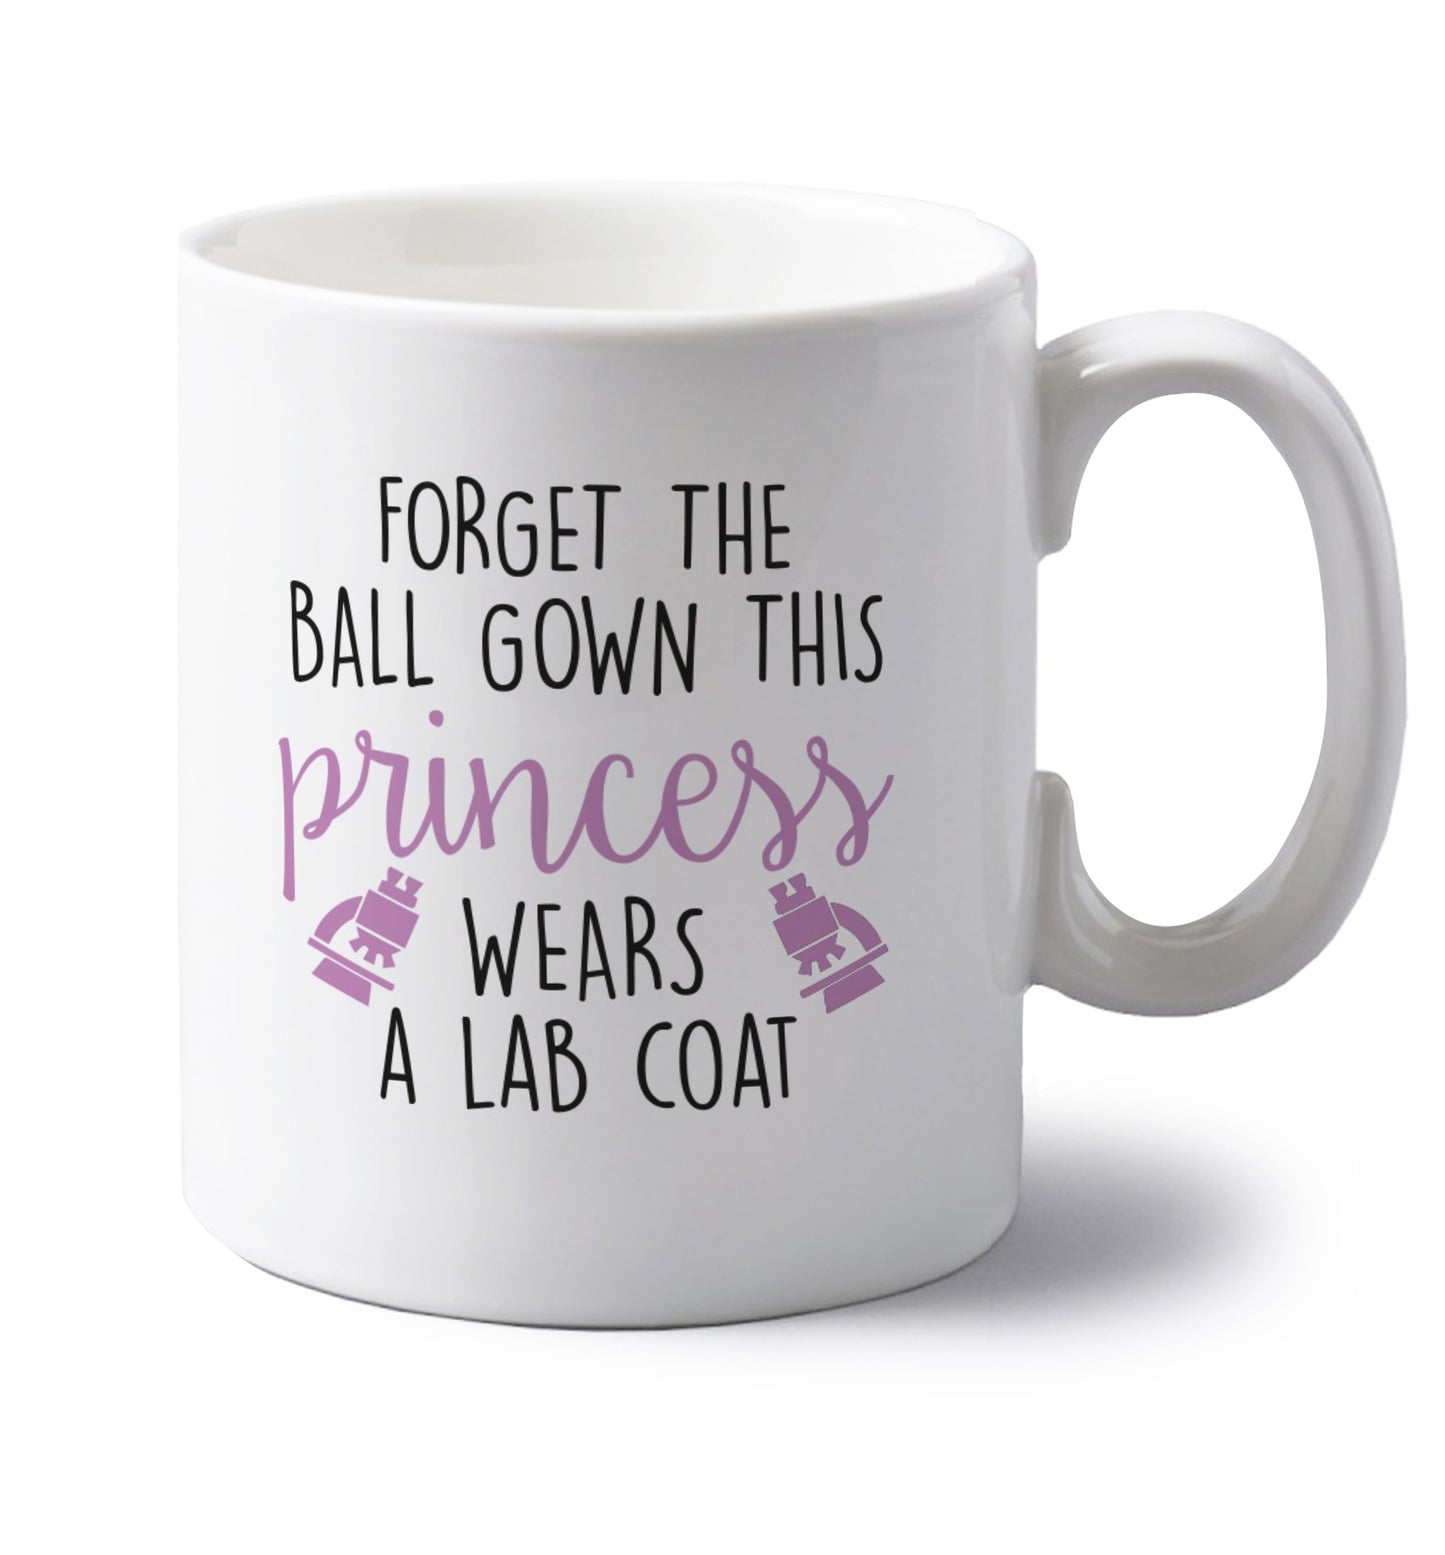 Forget the ball gown this princess wears a lab coat left handed white ceramic mug 